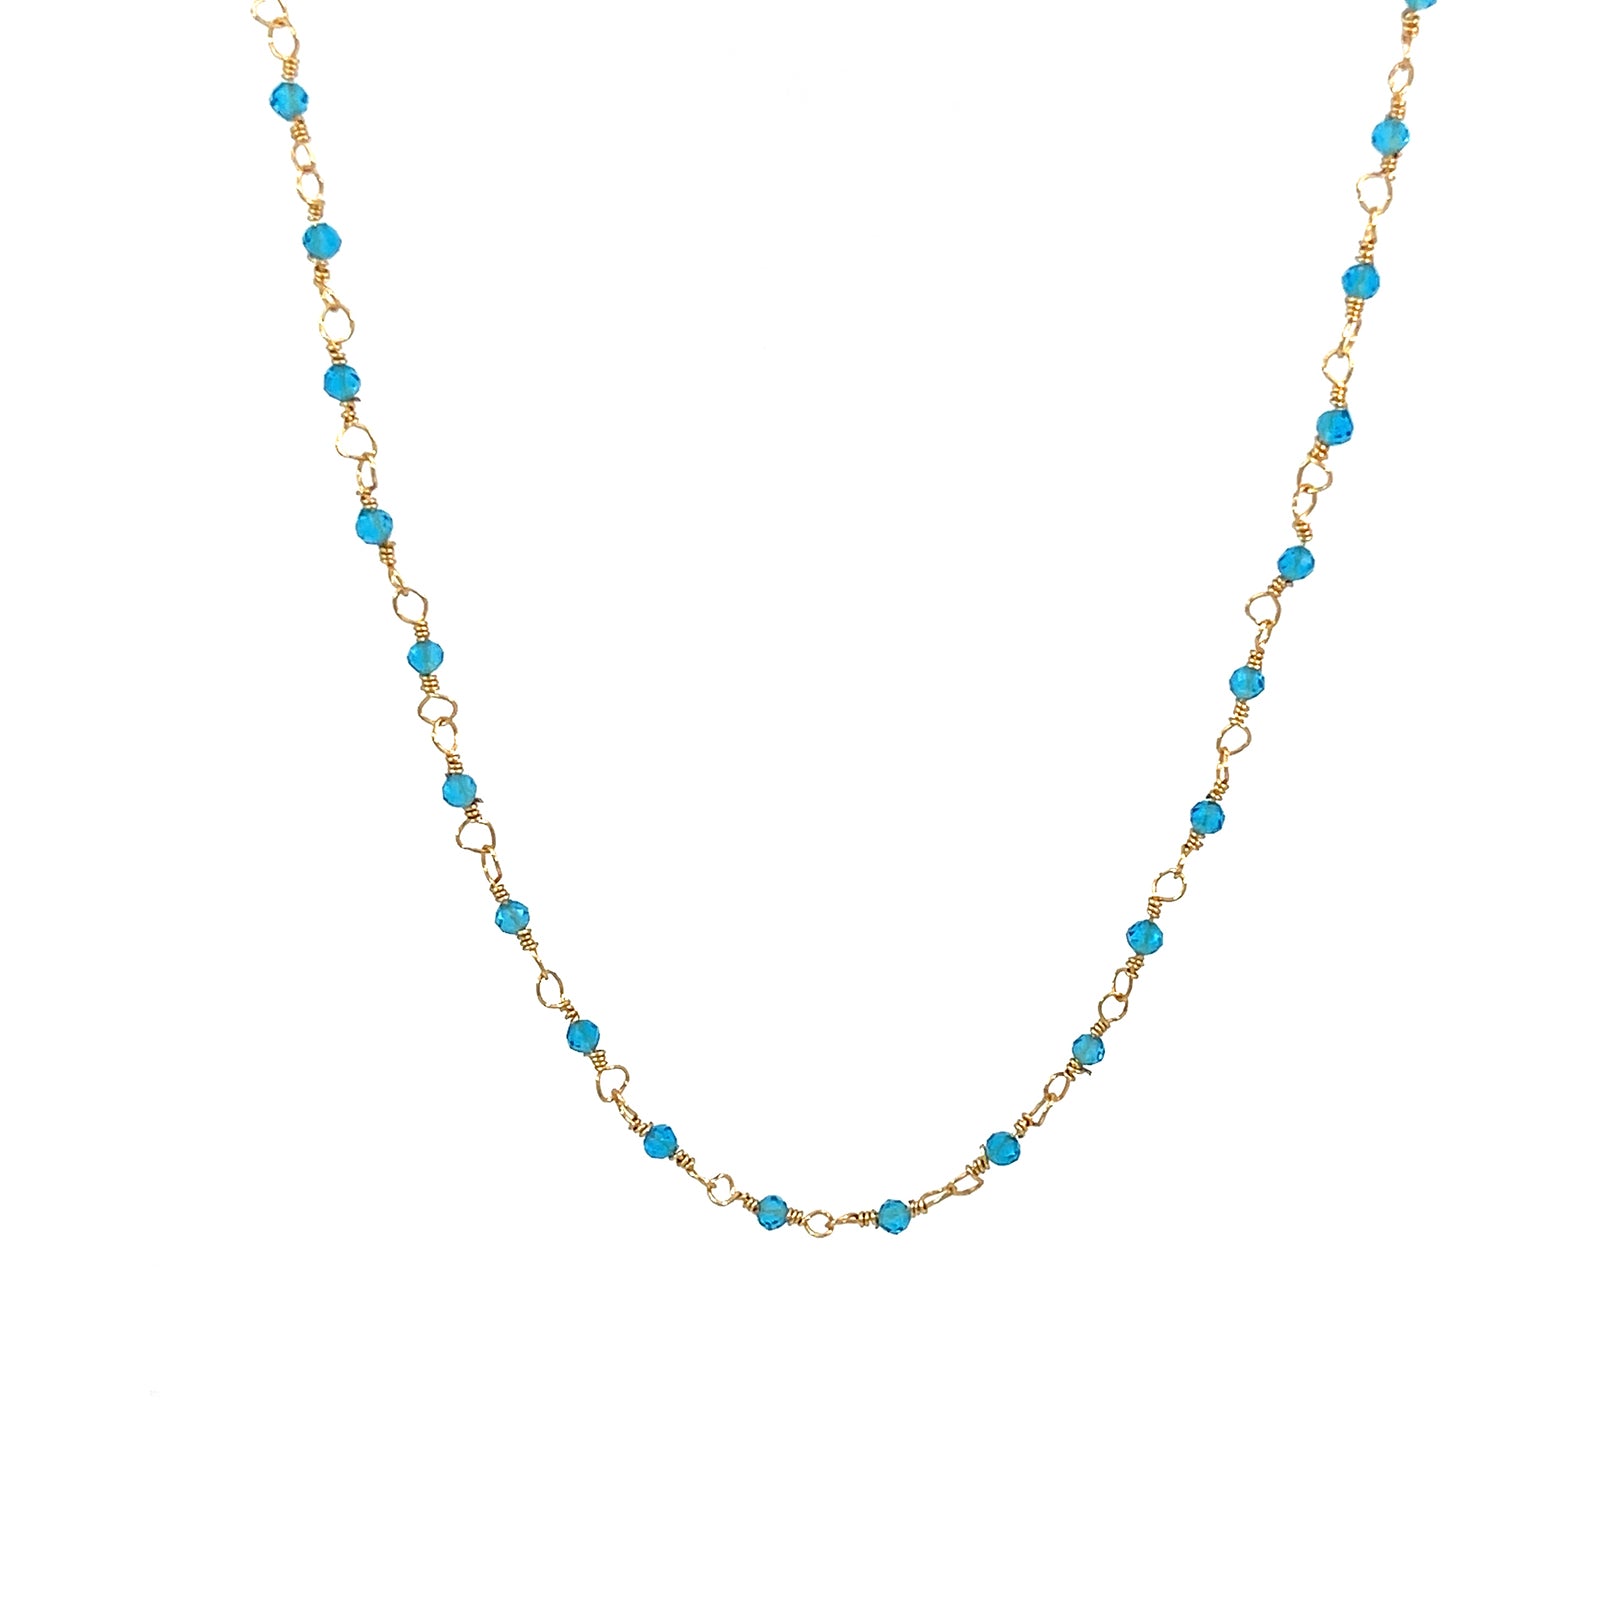 Shop Exclusive Chiyo Beaded Necklaces Now